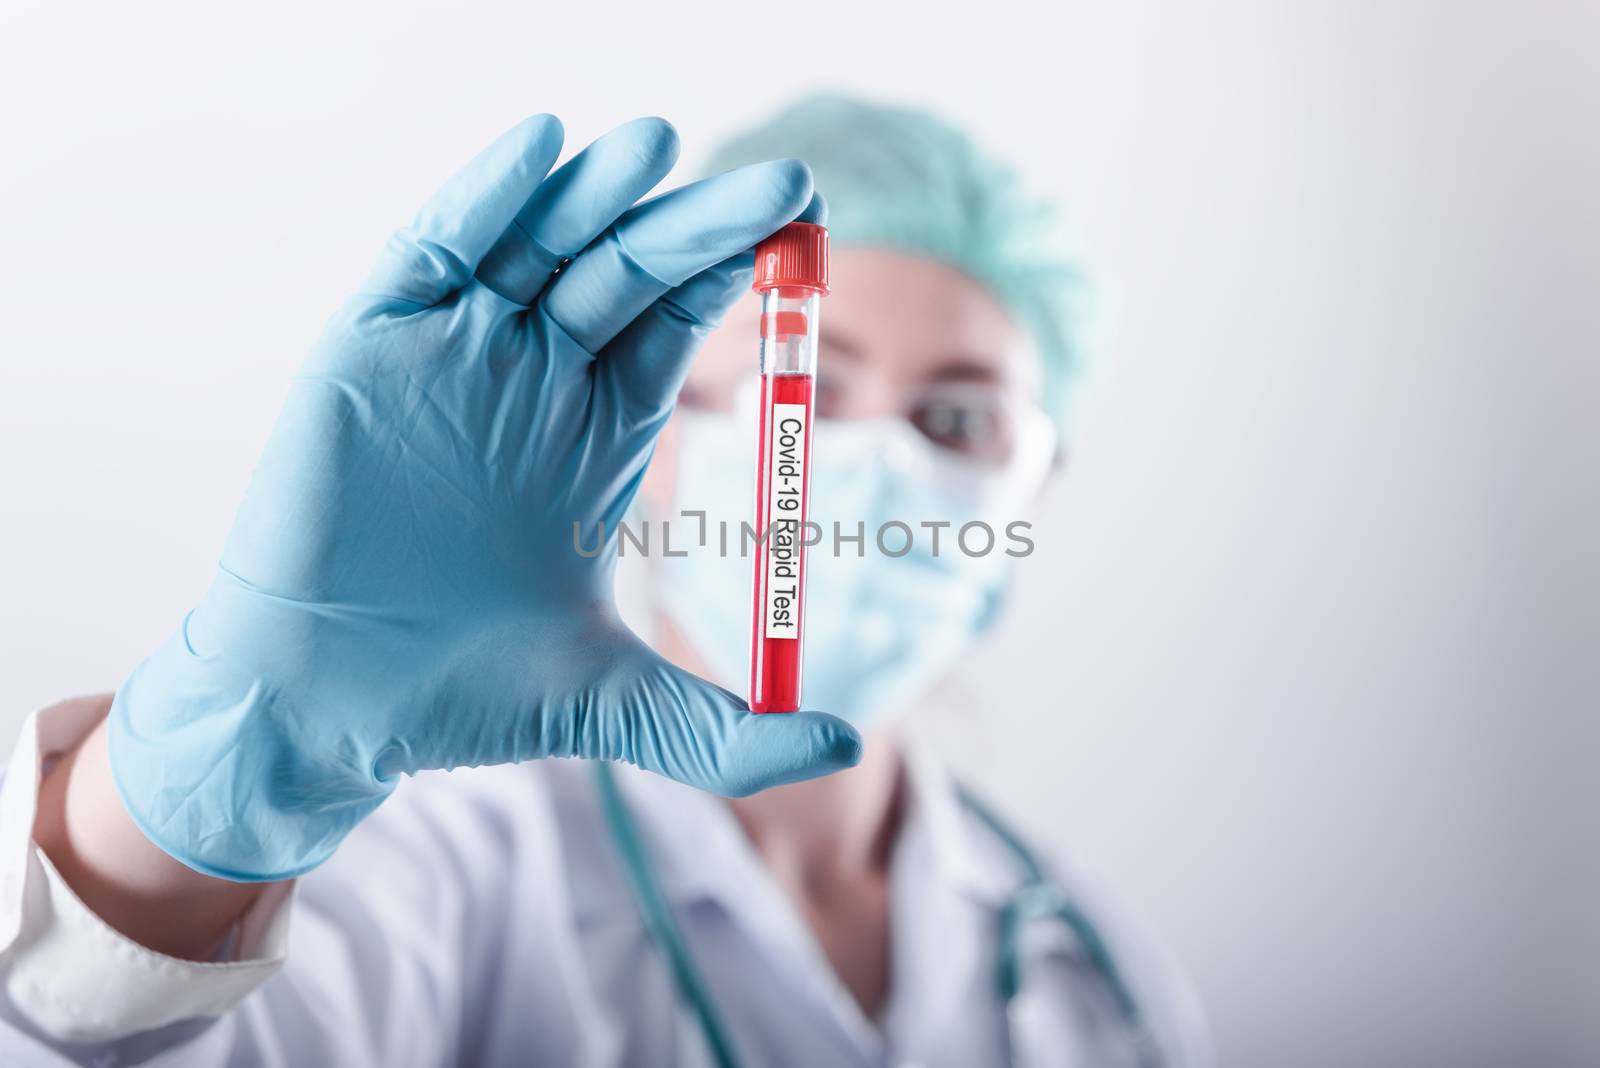 Coronavirus Covid-19 Lab Rapid Sample Test Concept, Medical Laboratory or Doctor Analyzing Corona Virus Patient Blood in Hospital Laboratory Room. Covid19 Diagnostics and Medicine Clinical Health Care by MahaHeang245789